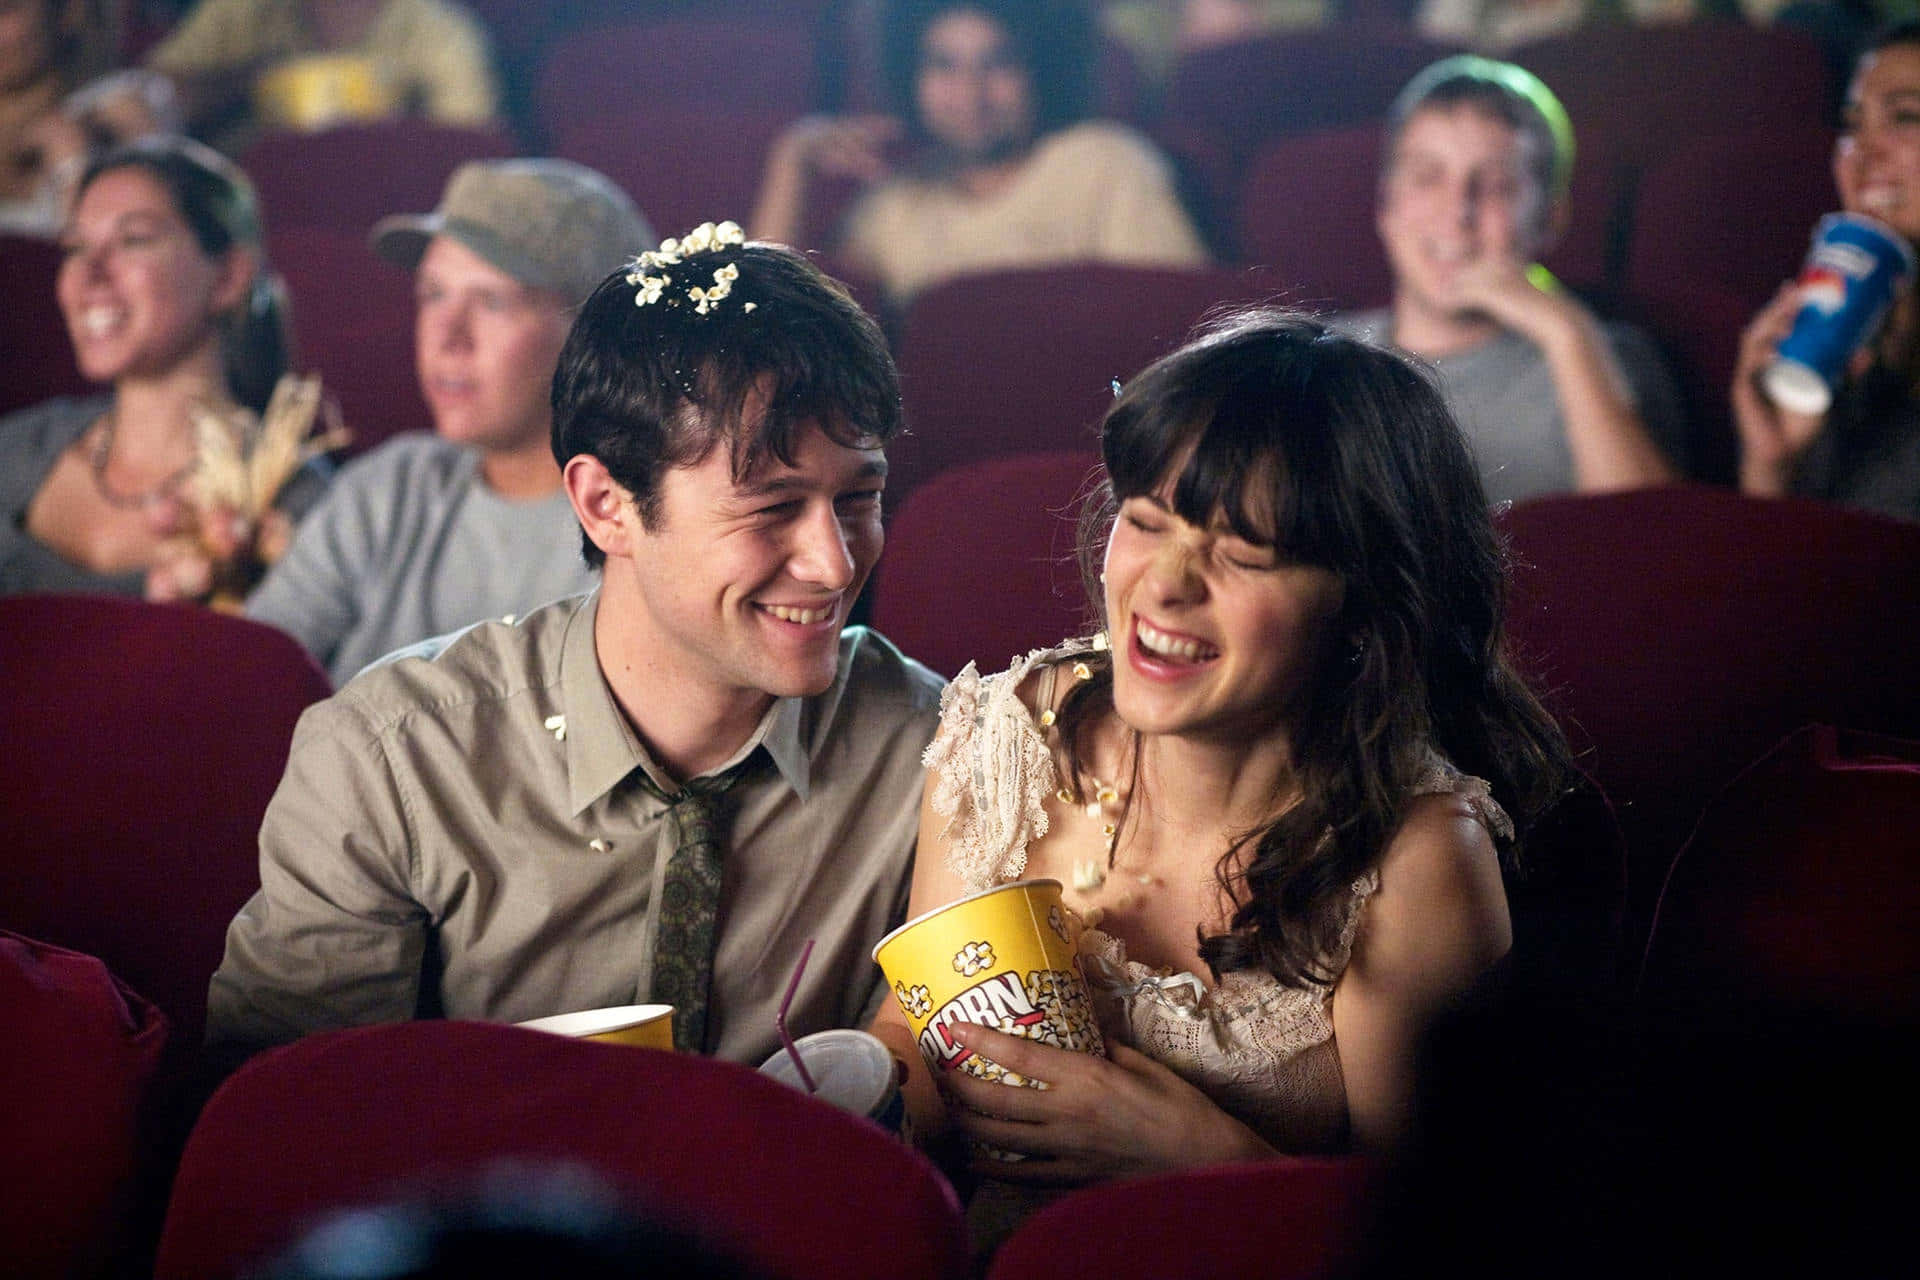 Tom and Summer Rekindle Their Romance in 500 Days Of Summer